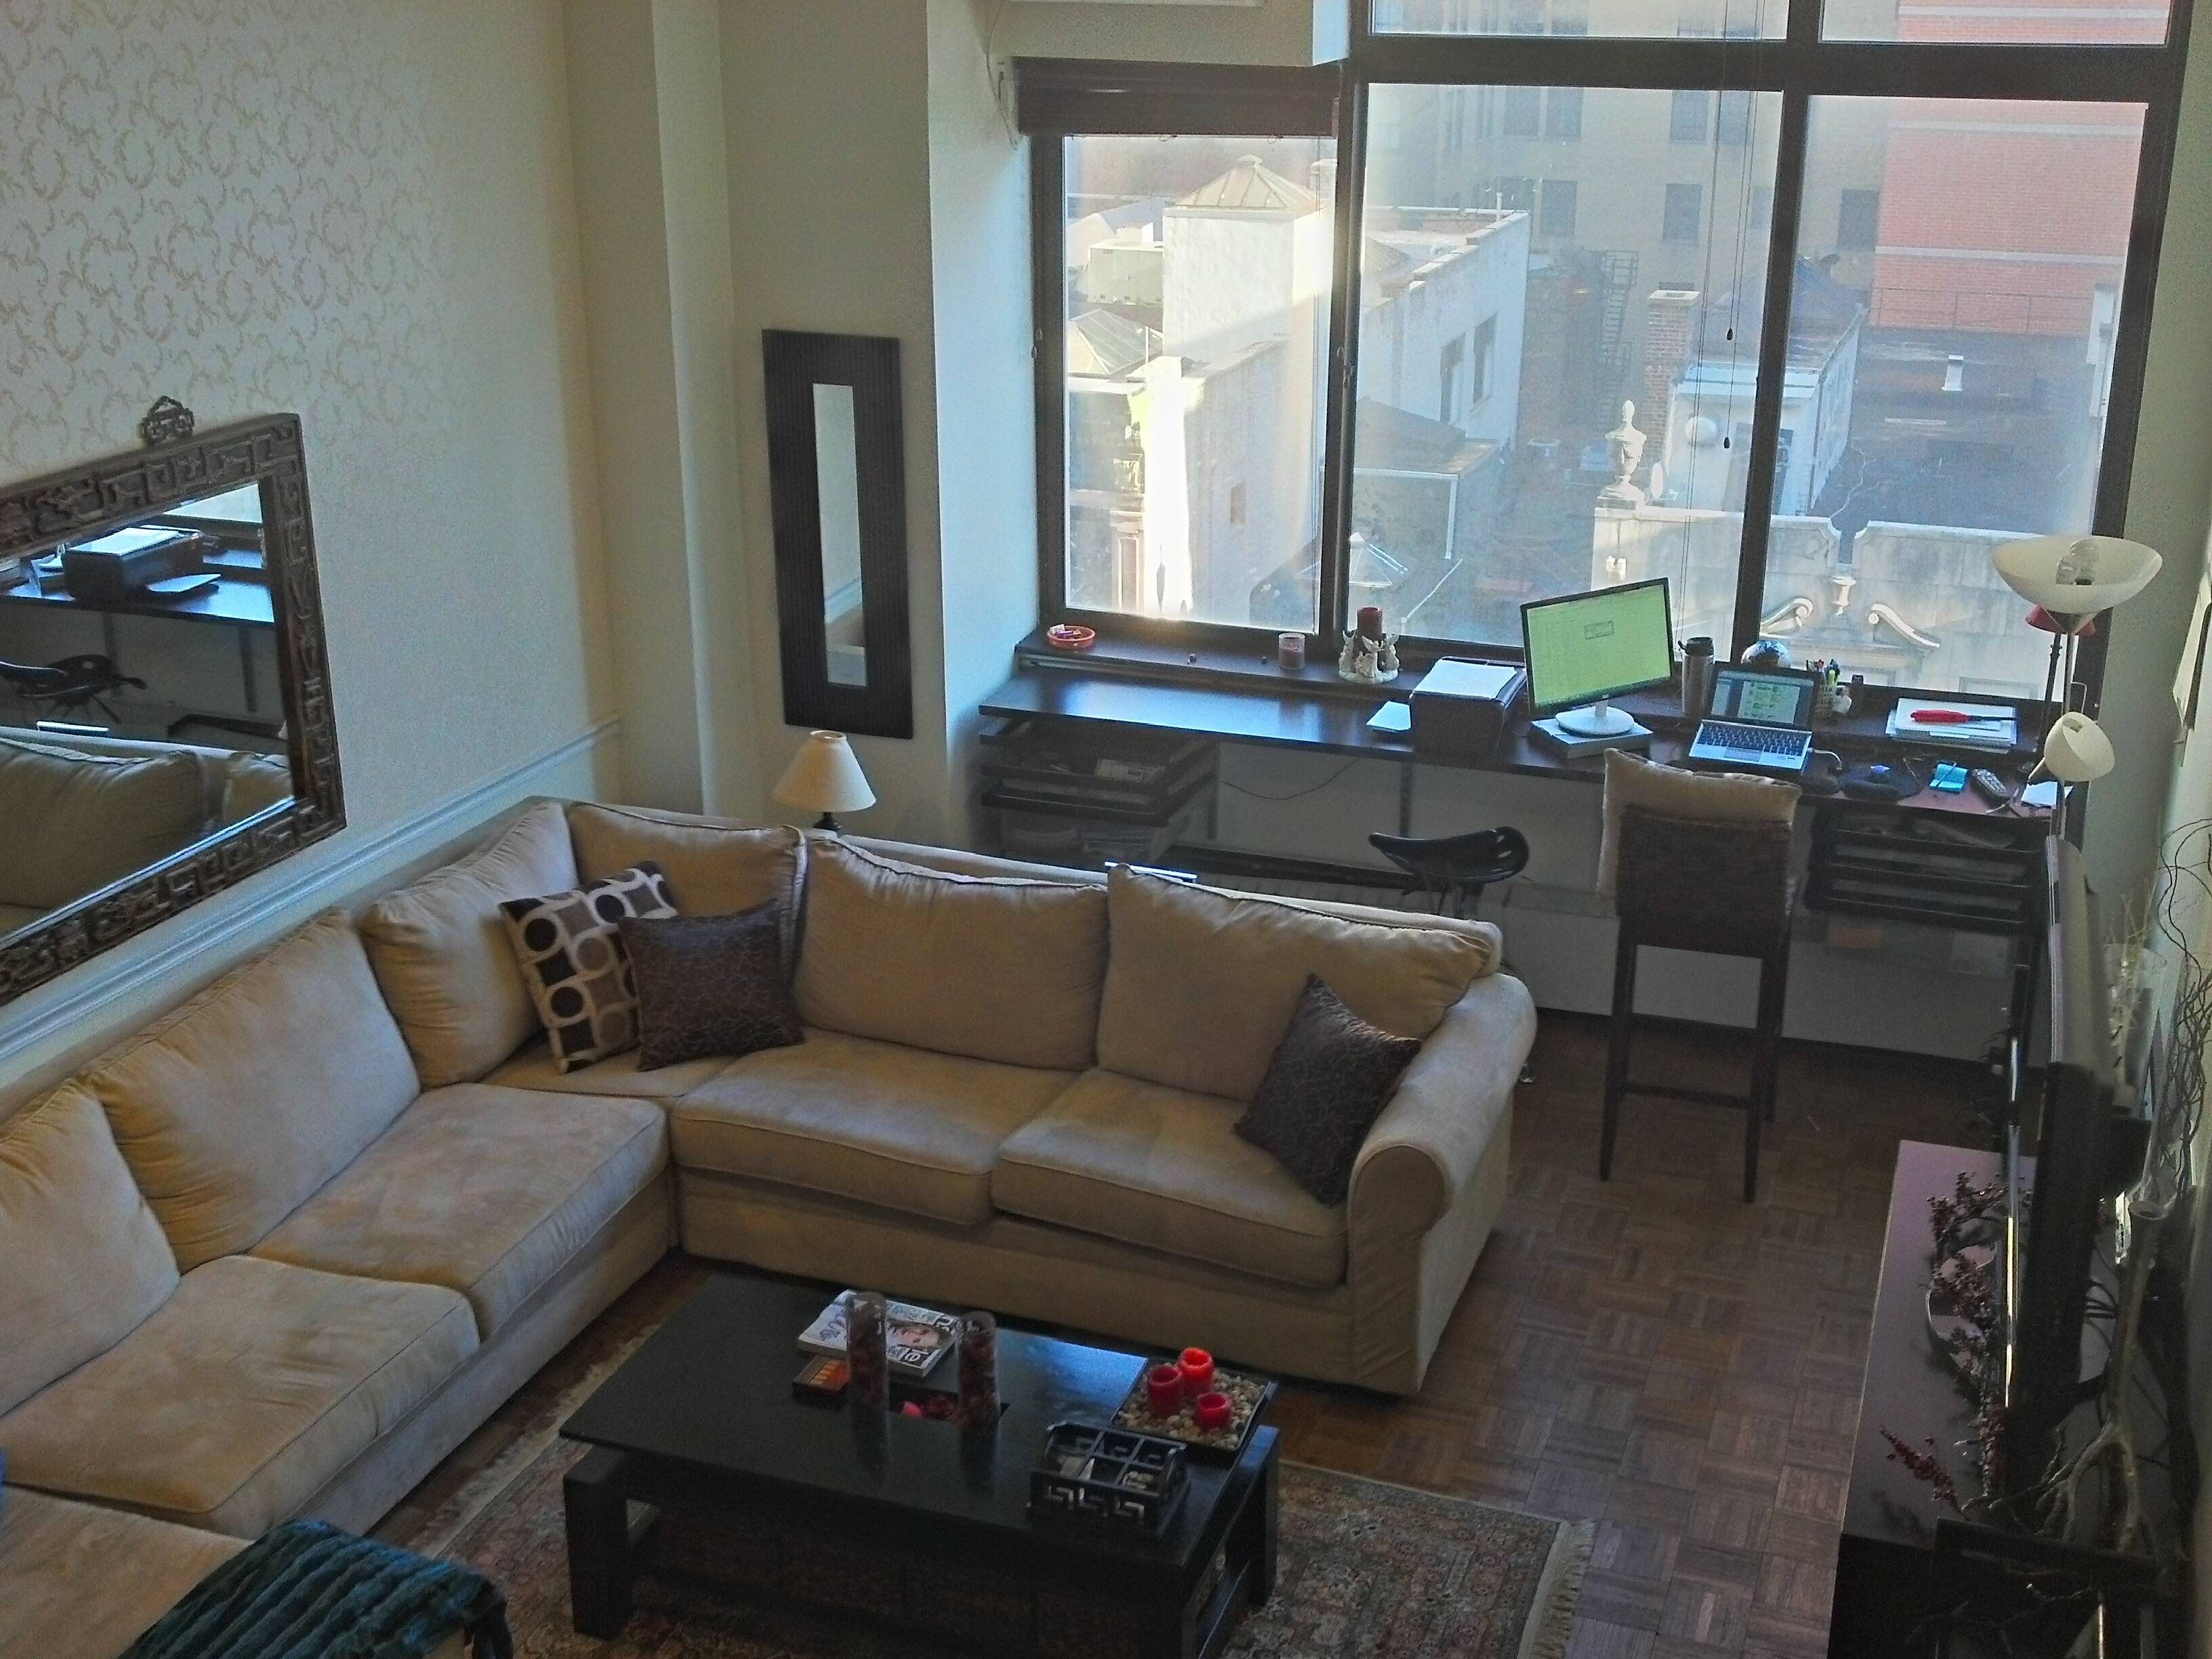 Spacious loft for rent, renovated kitchen and bathroom, bright large windows, flexible terms, $3700